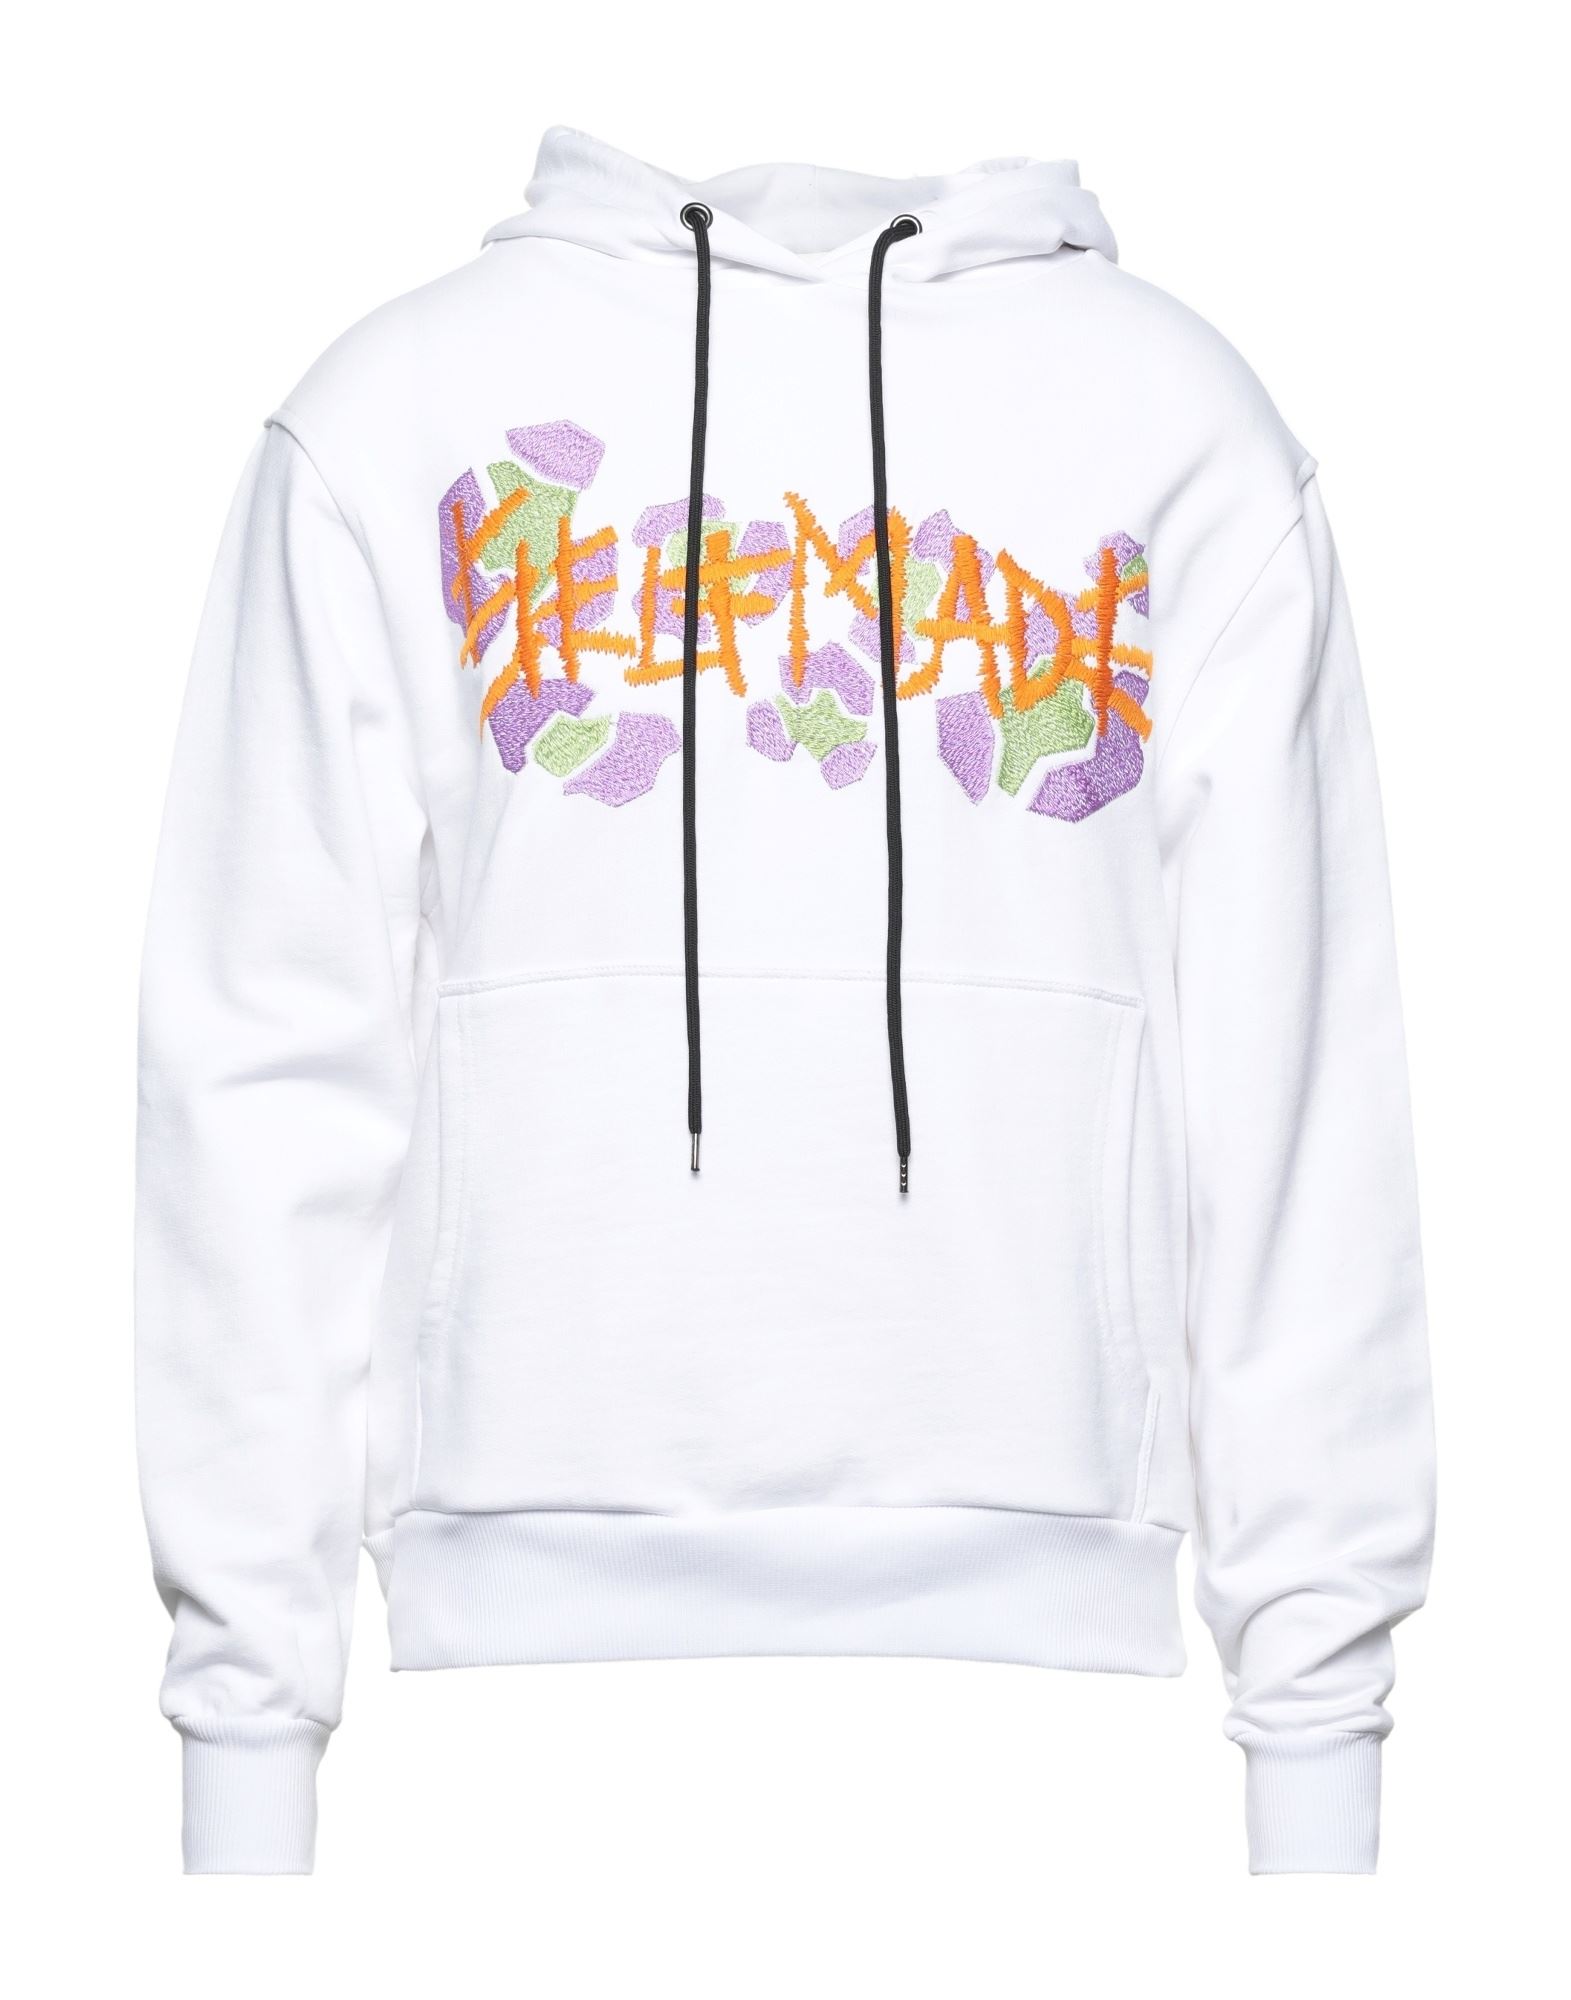 Self Made By Gianfranco Villegas Sweatshirts In White